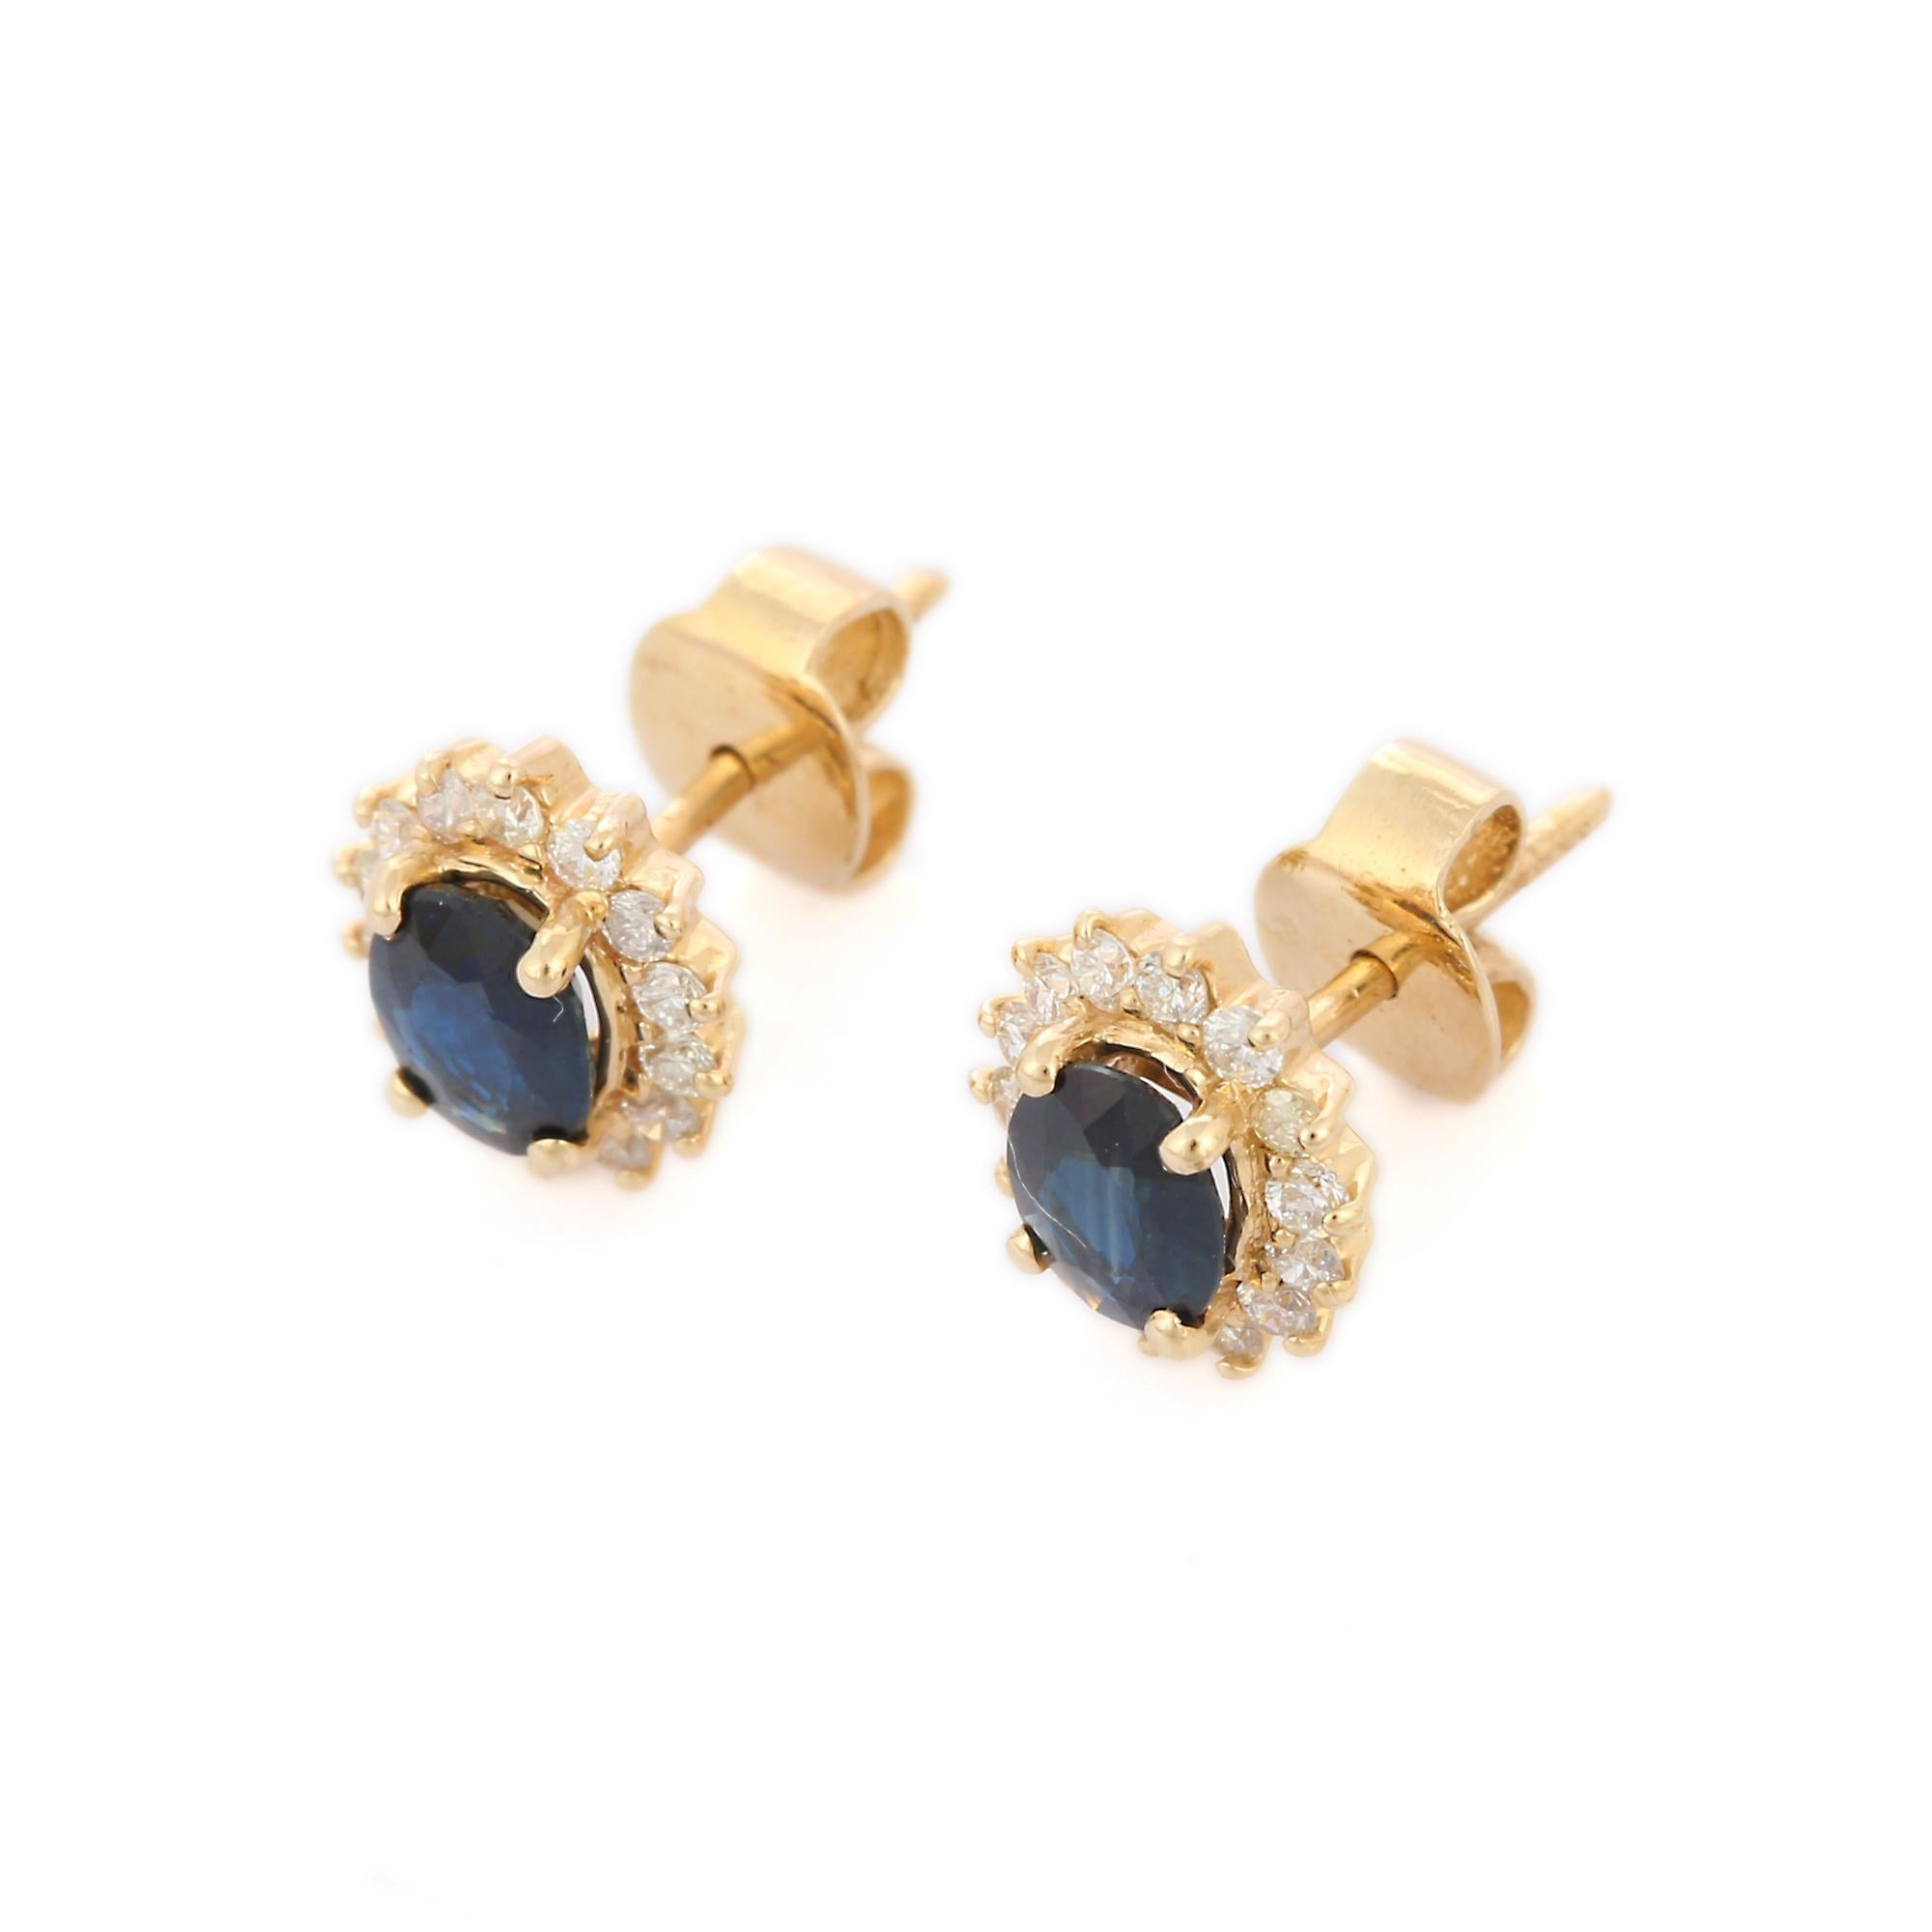 Studs create a subtle beauty while showcasing the colors of the natural precious gemstones and illuminating diamonds making a statement.

Oval cut blue sapphire studs in 14K gold. Embrace your look with these stunning pair of earrings suitable for